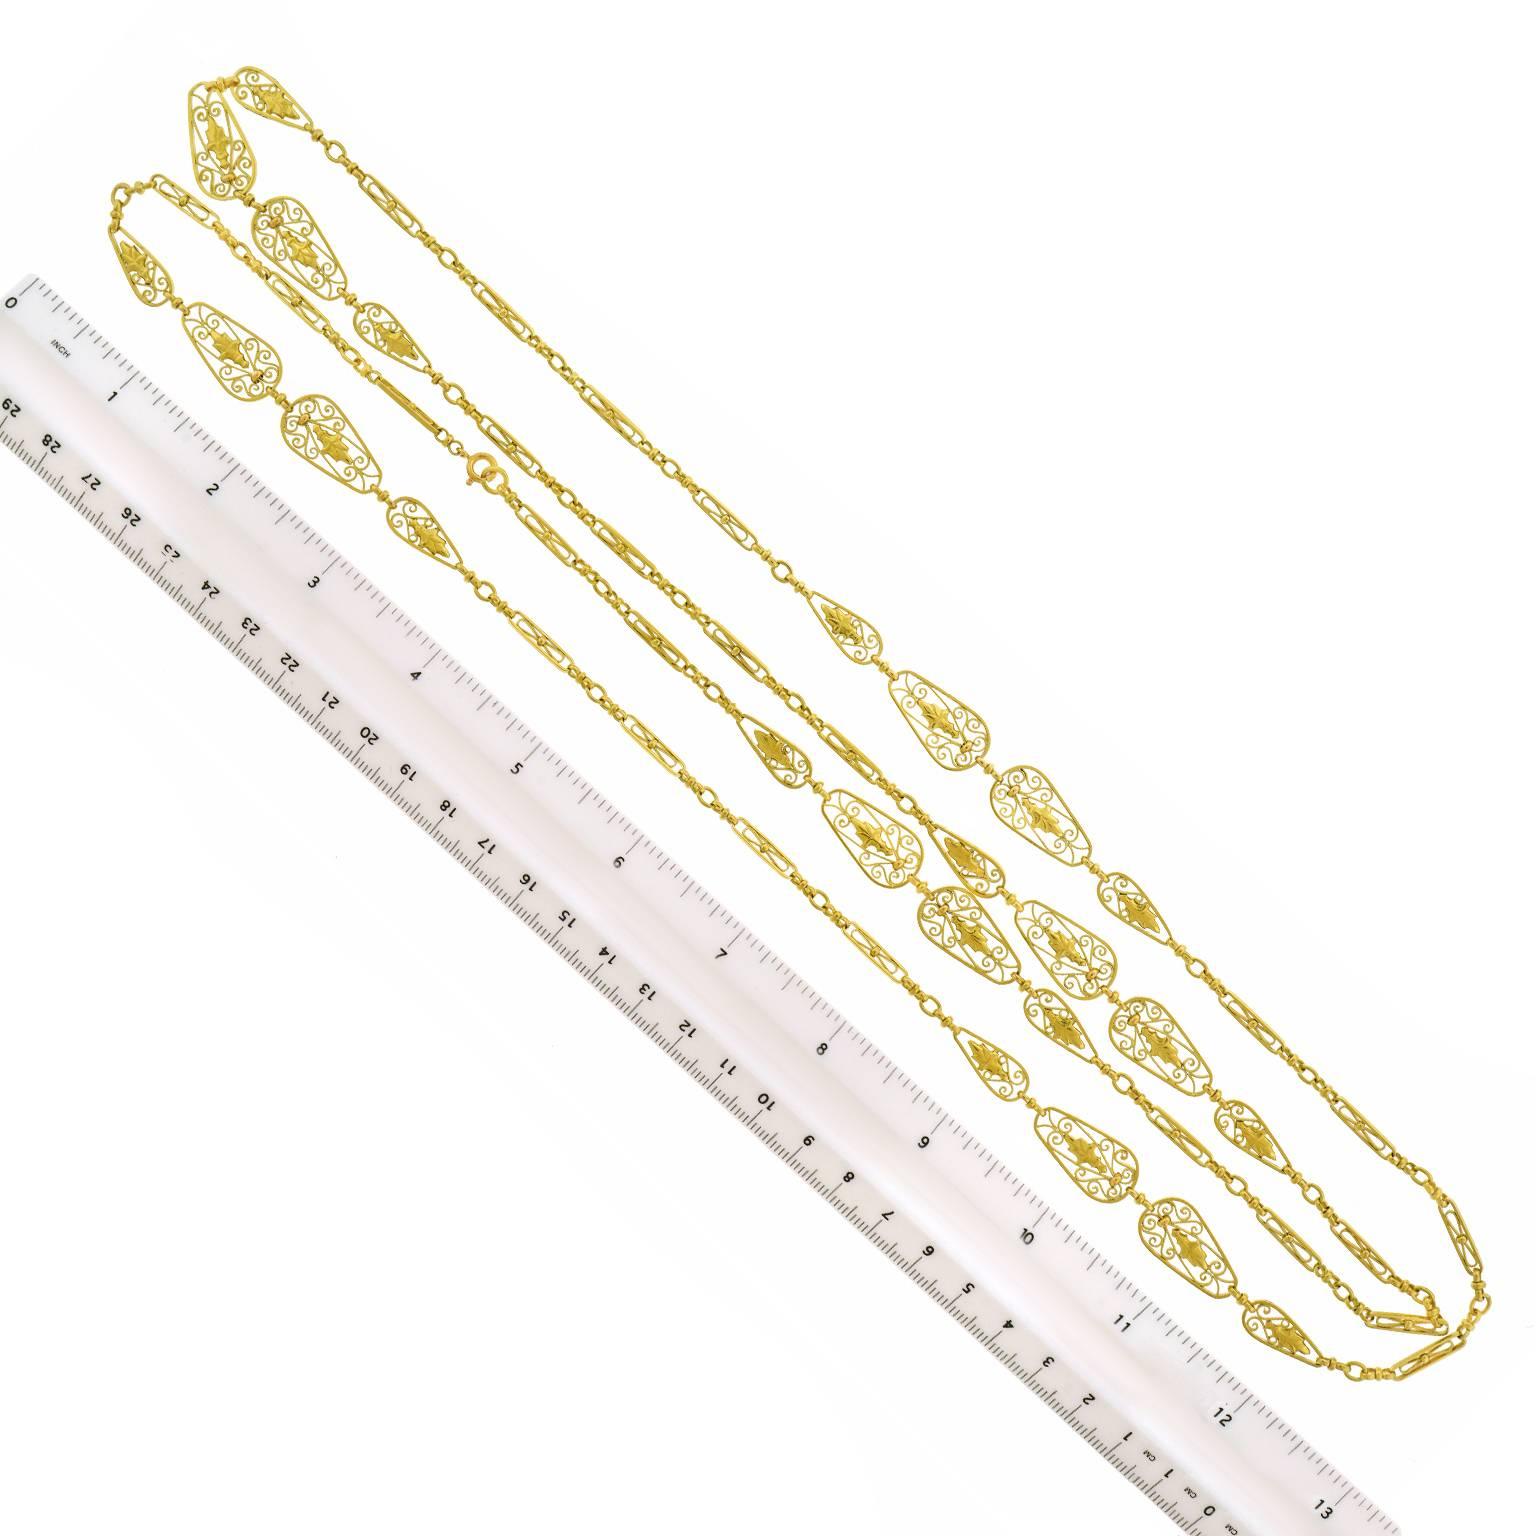 Women's or Men's Antique French 53-inch long Gold Filigree Necklace